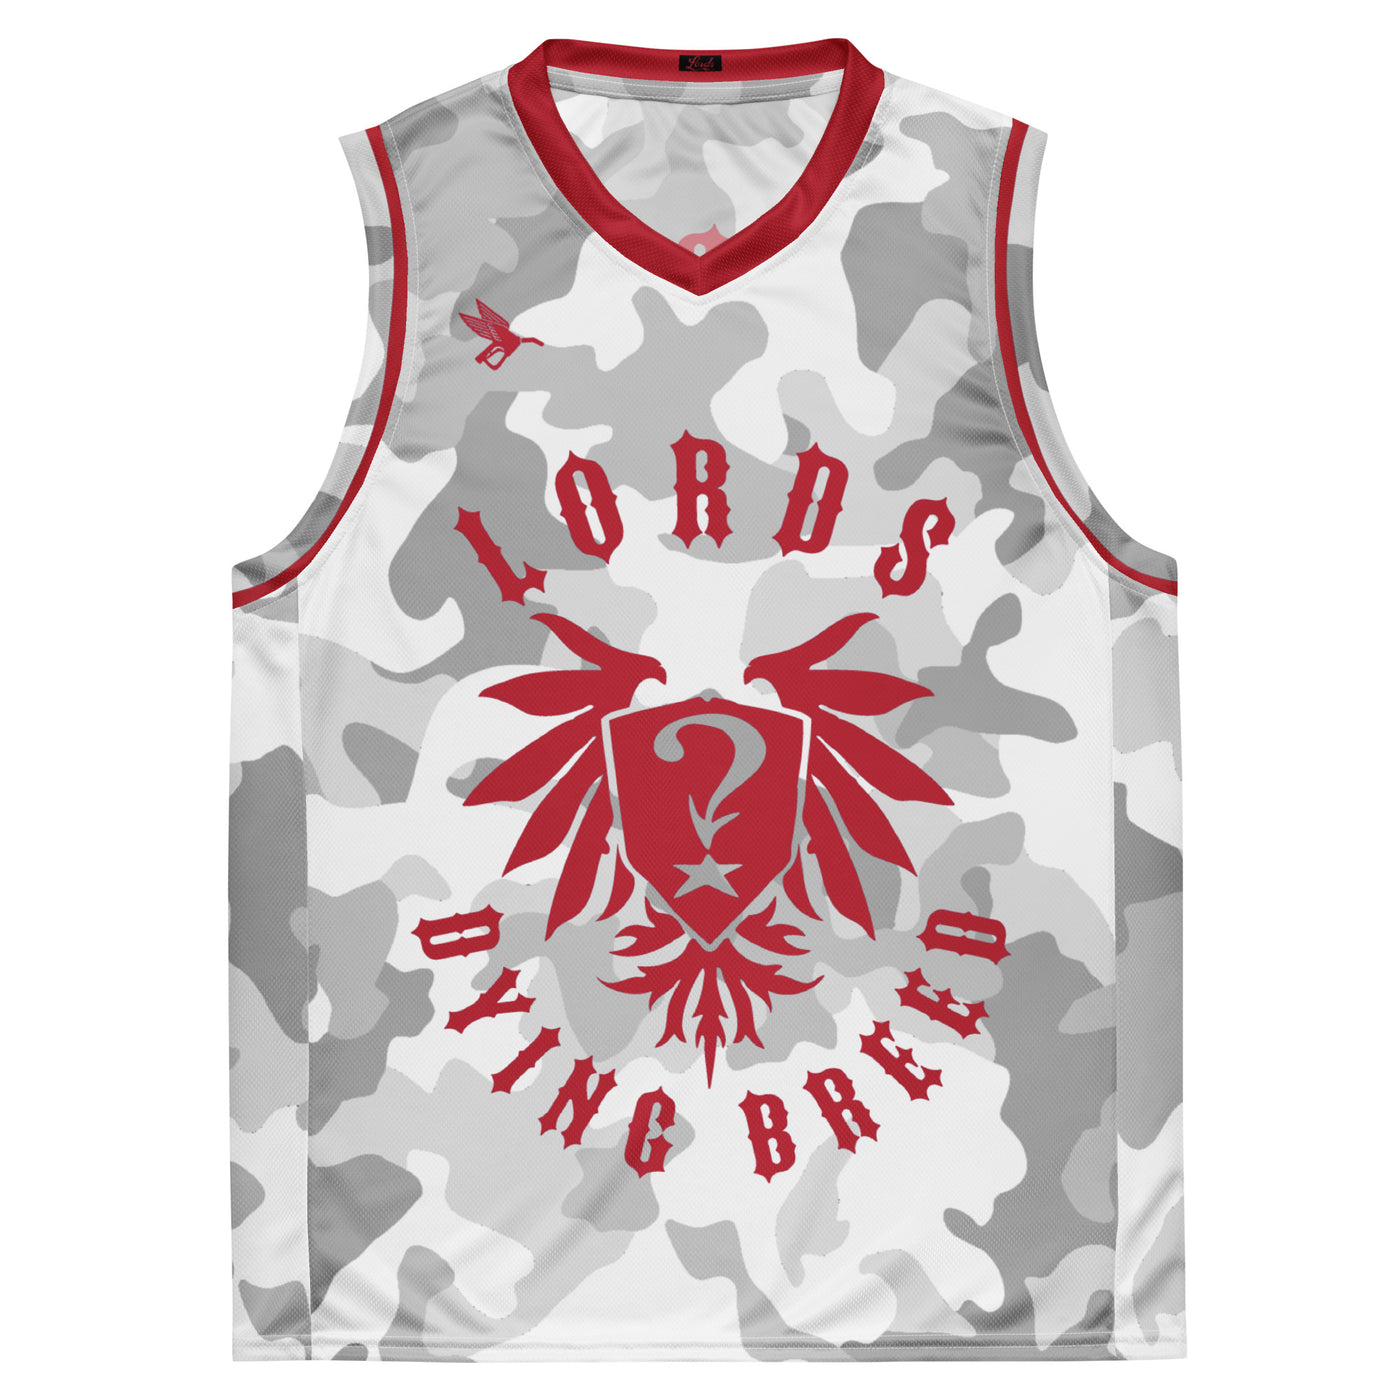 Pure Blood Hardwood Jersey - White Camo/Red